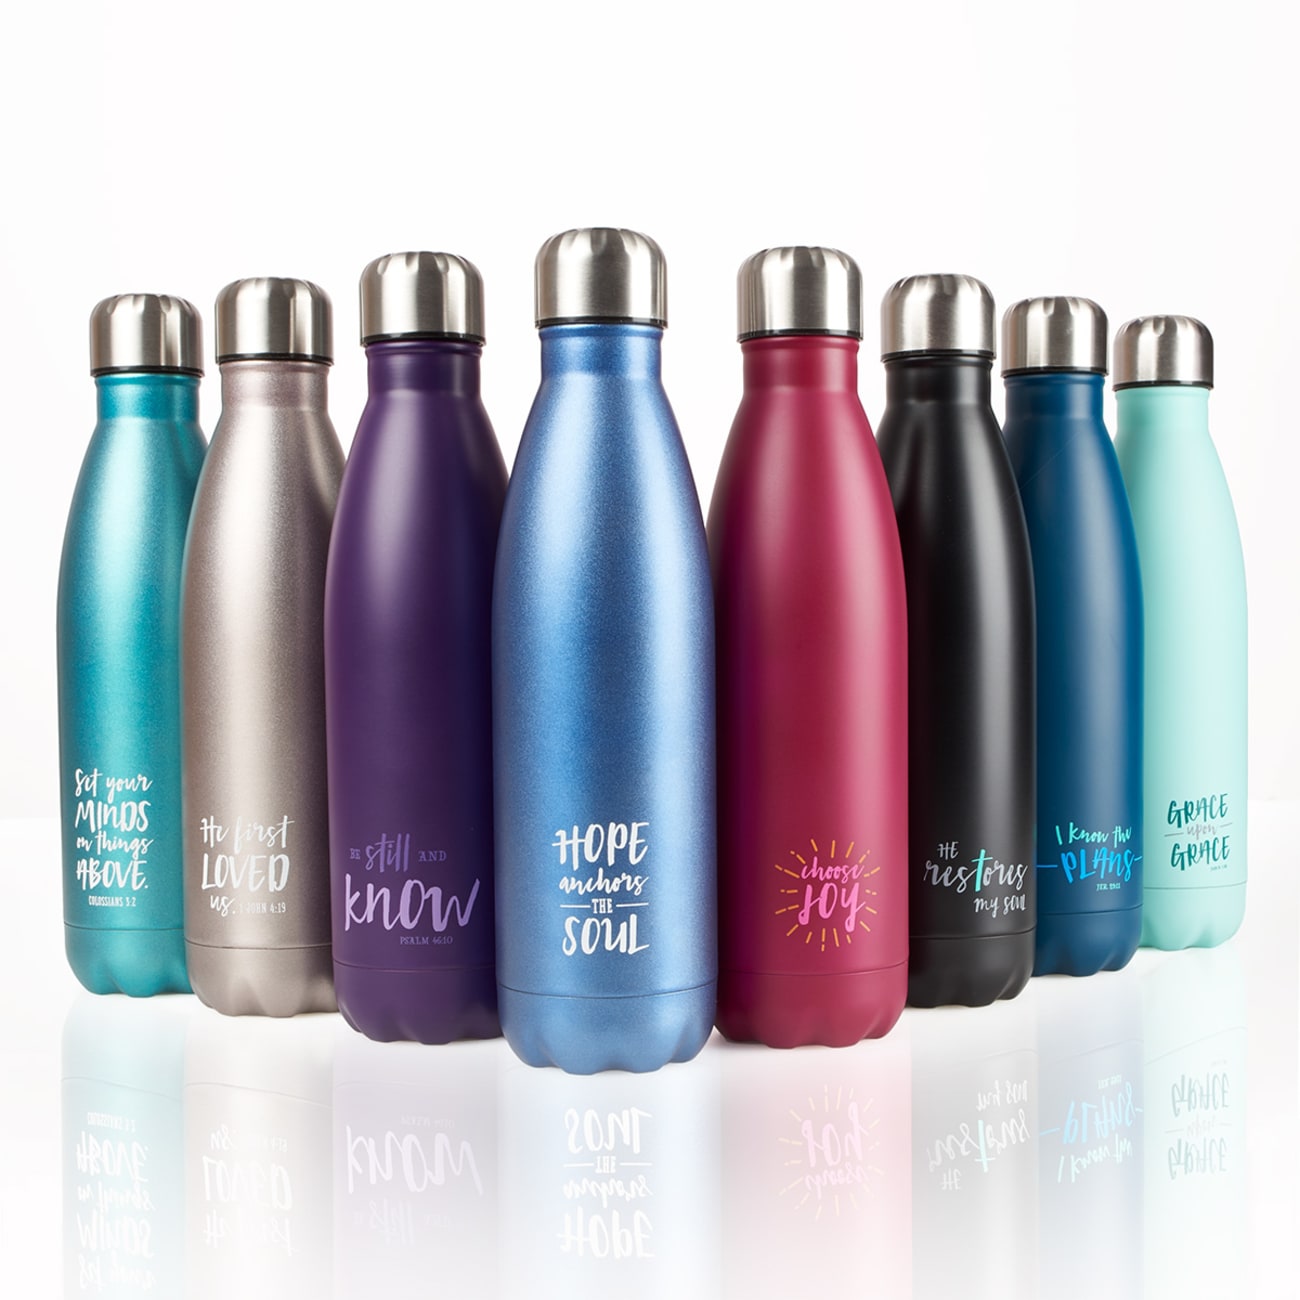 Water Bottle 500ml Stainless Steel: Blue - I Know the Plans (Vacuum Sealed) Homeware